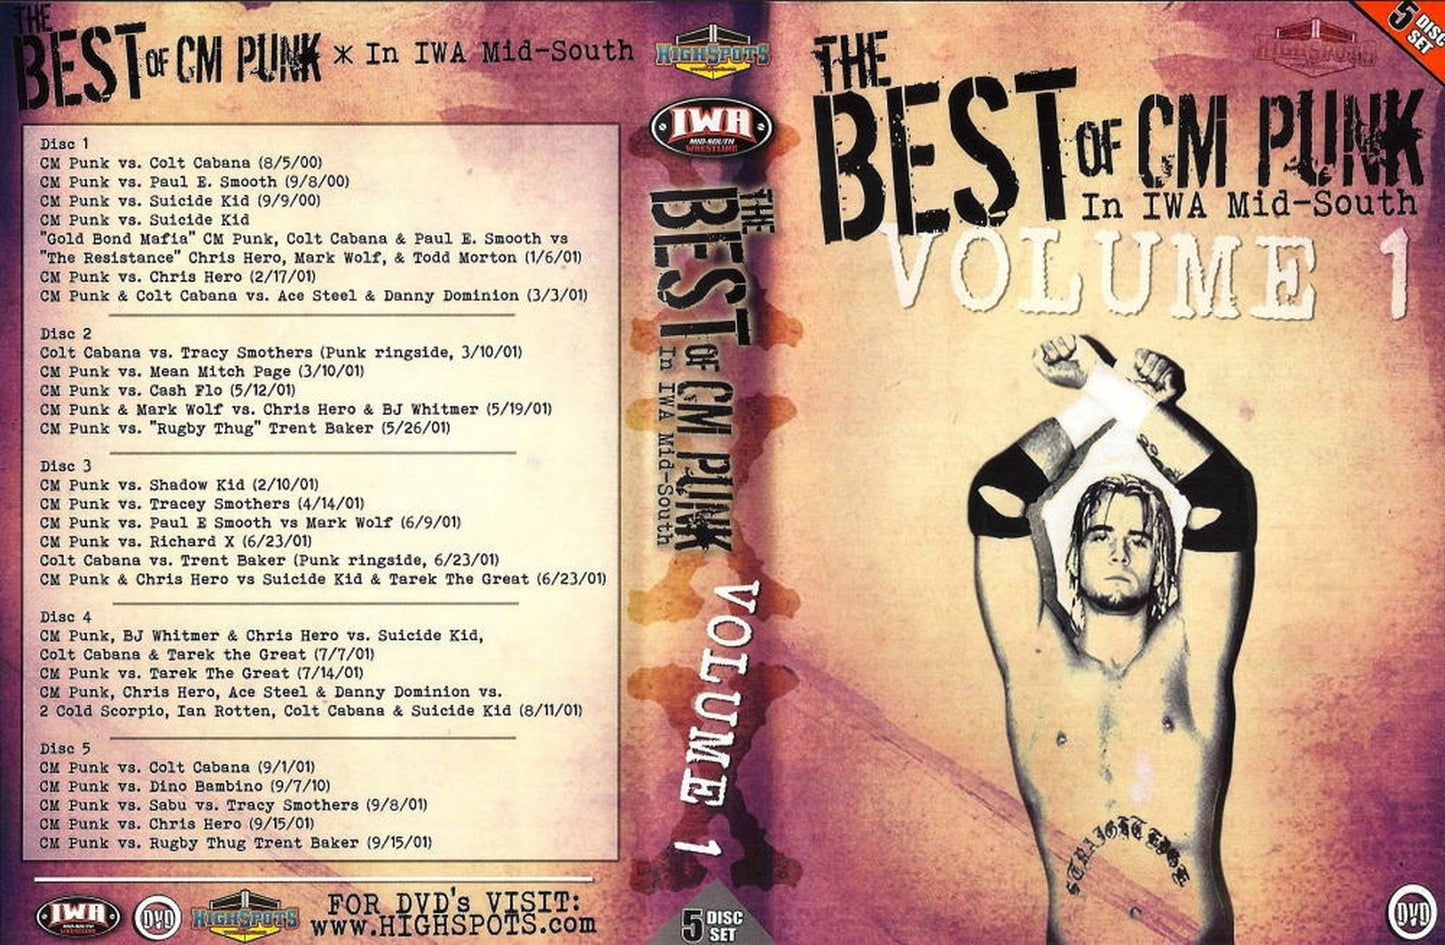 the best of cm punk in iwa mid-south - volume 1